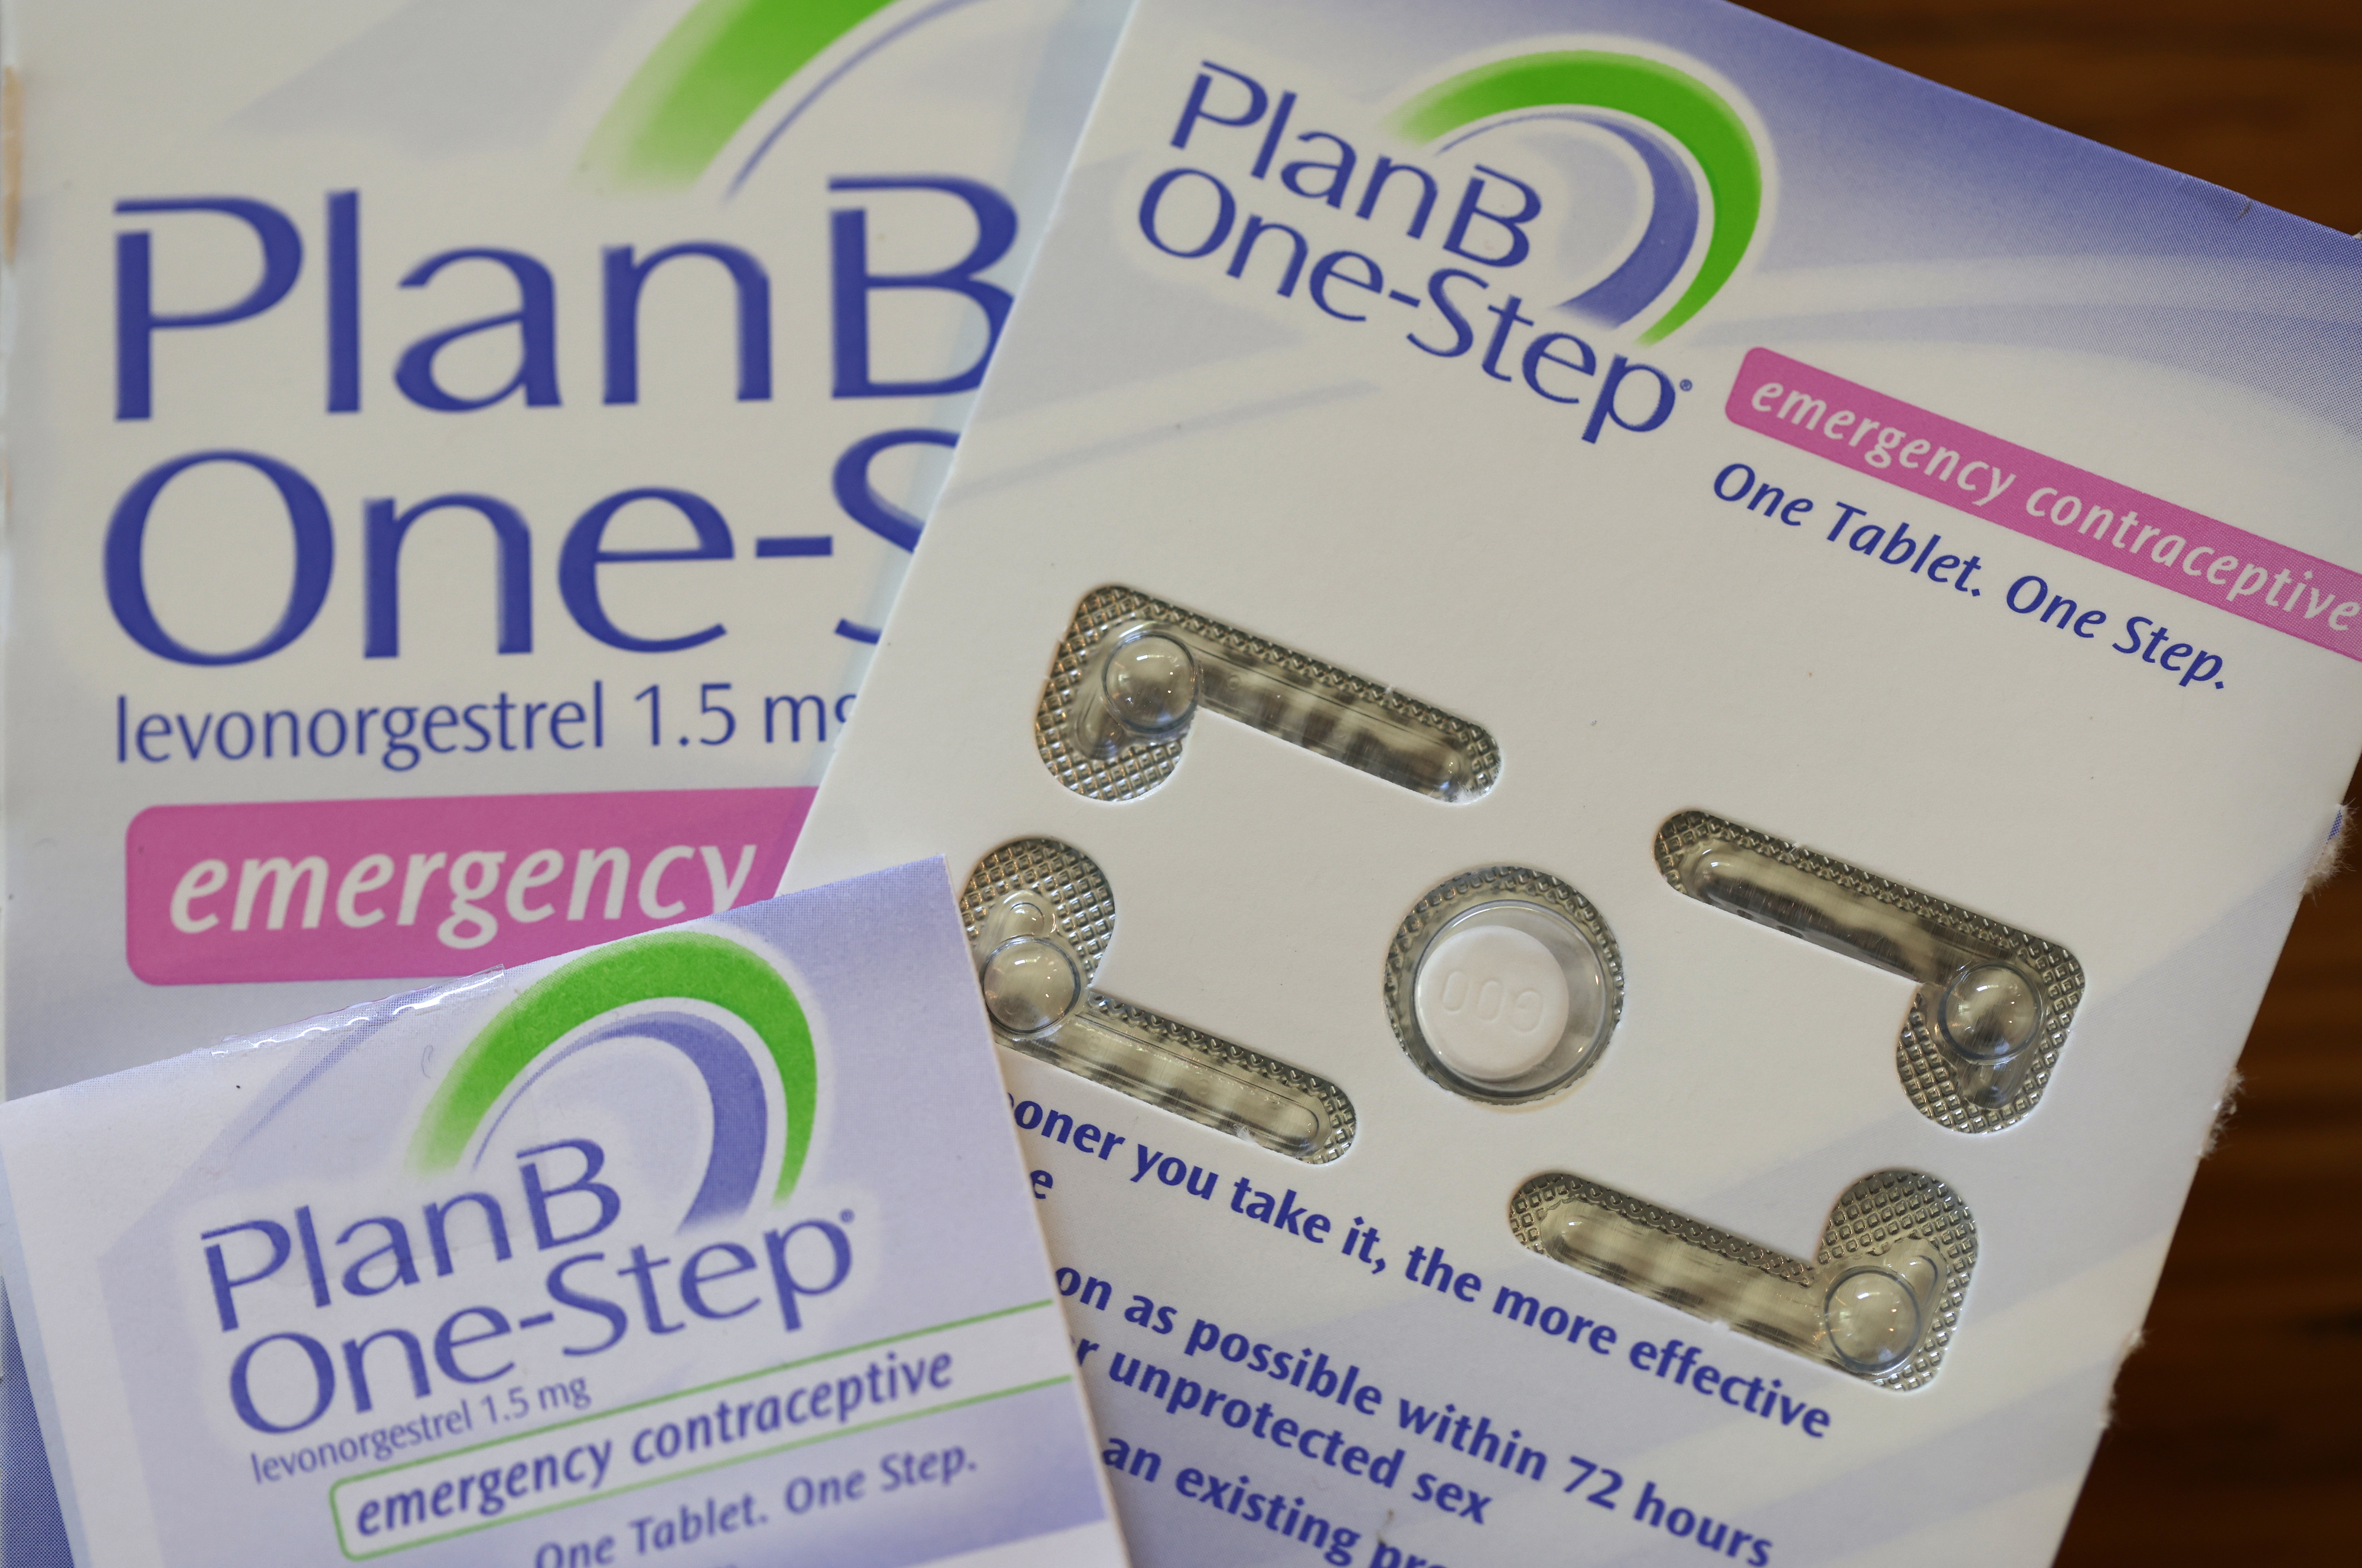 plan B package with instructions that say to take as soon as possible within 72 hours of unprotected sex